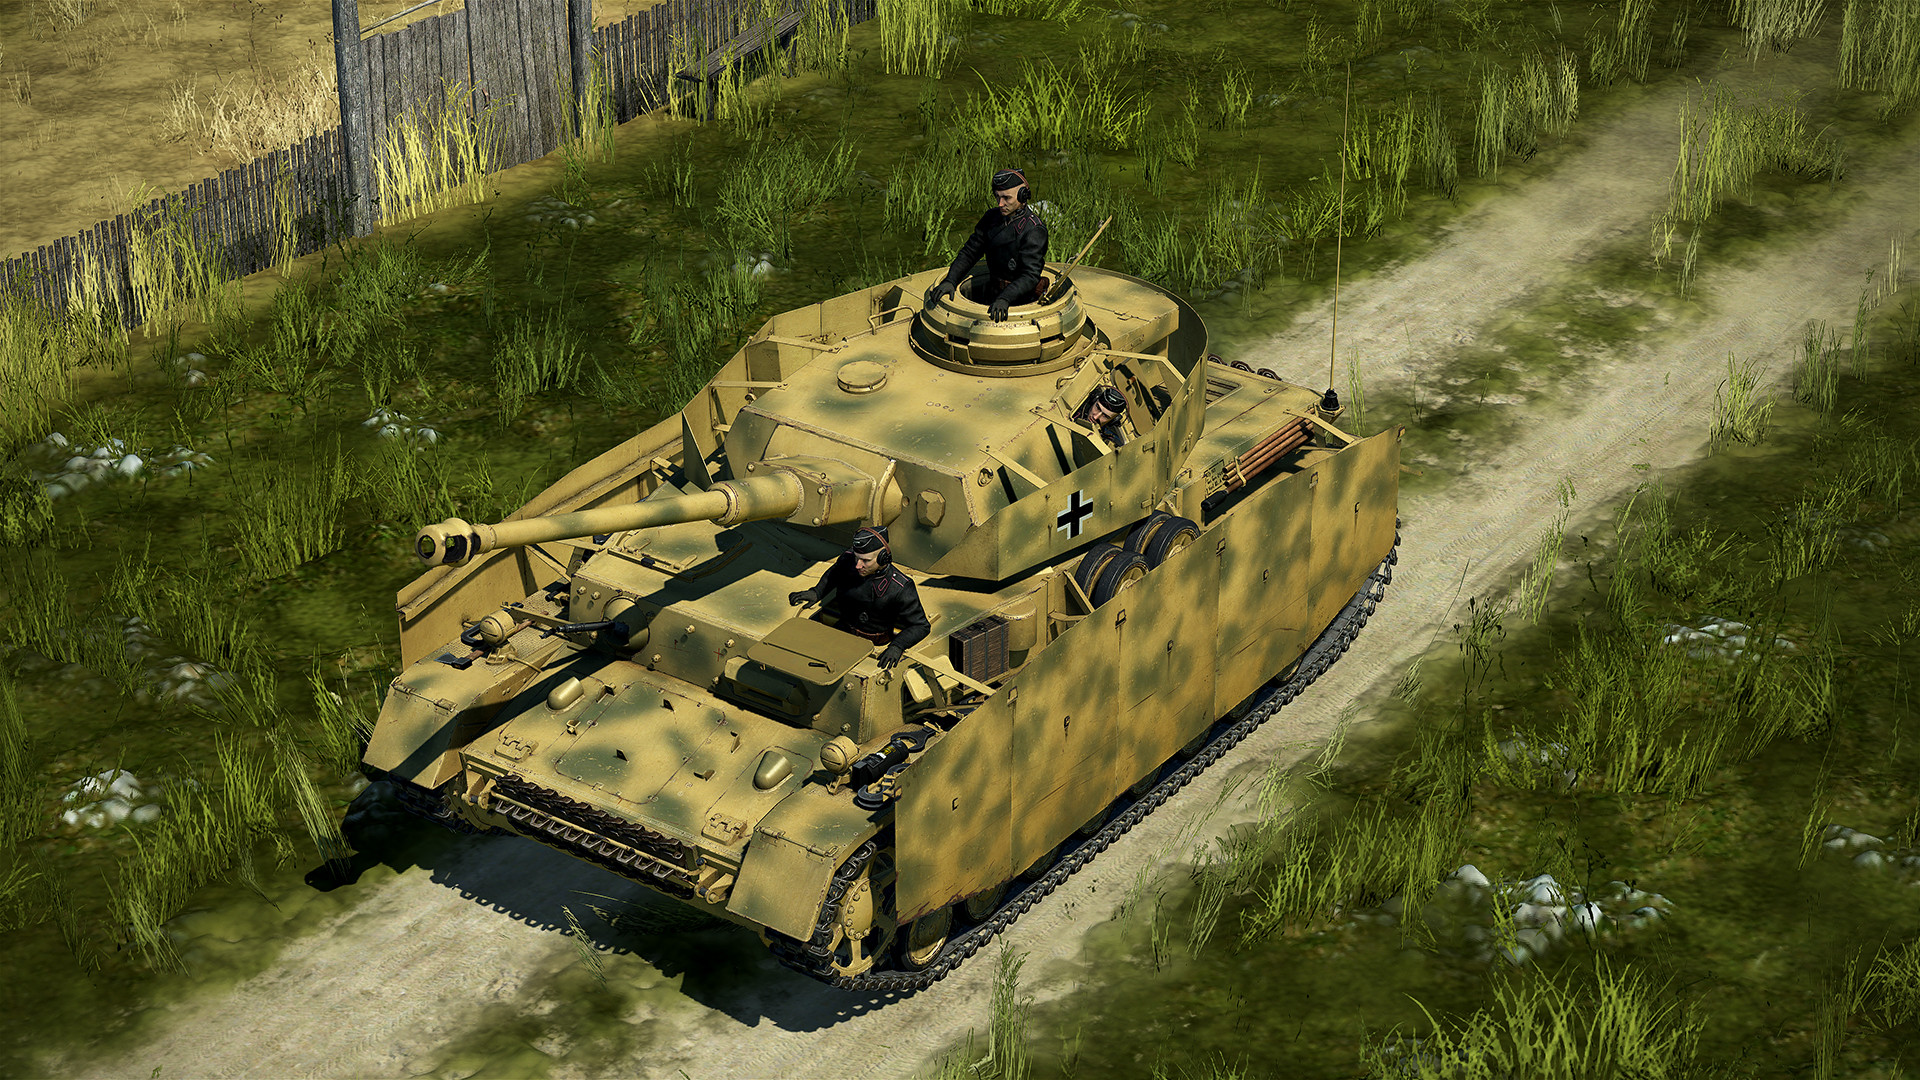 il 2 sturmovik battle of moscow player controled tanks